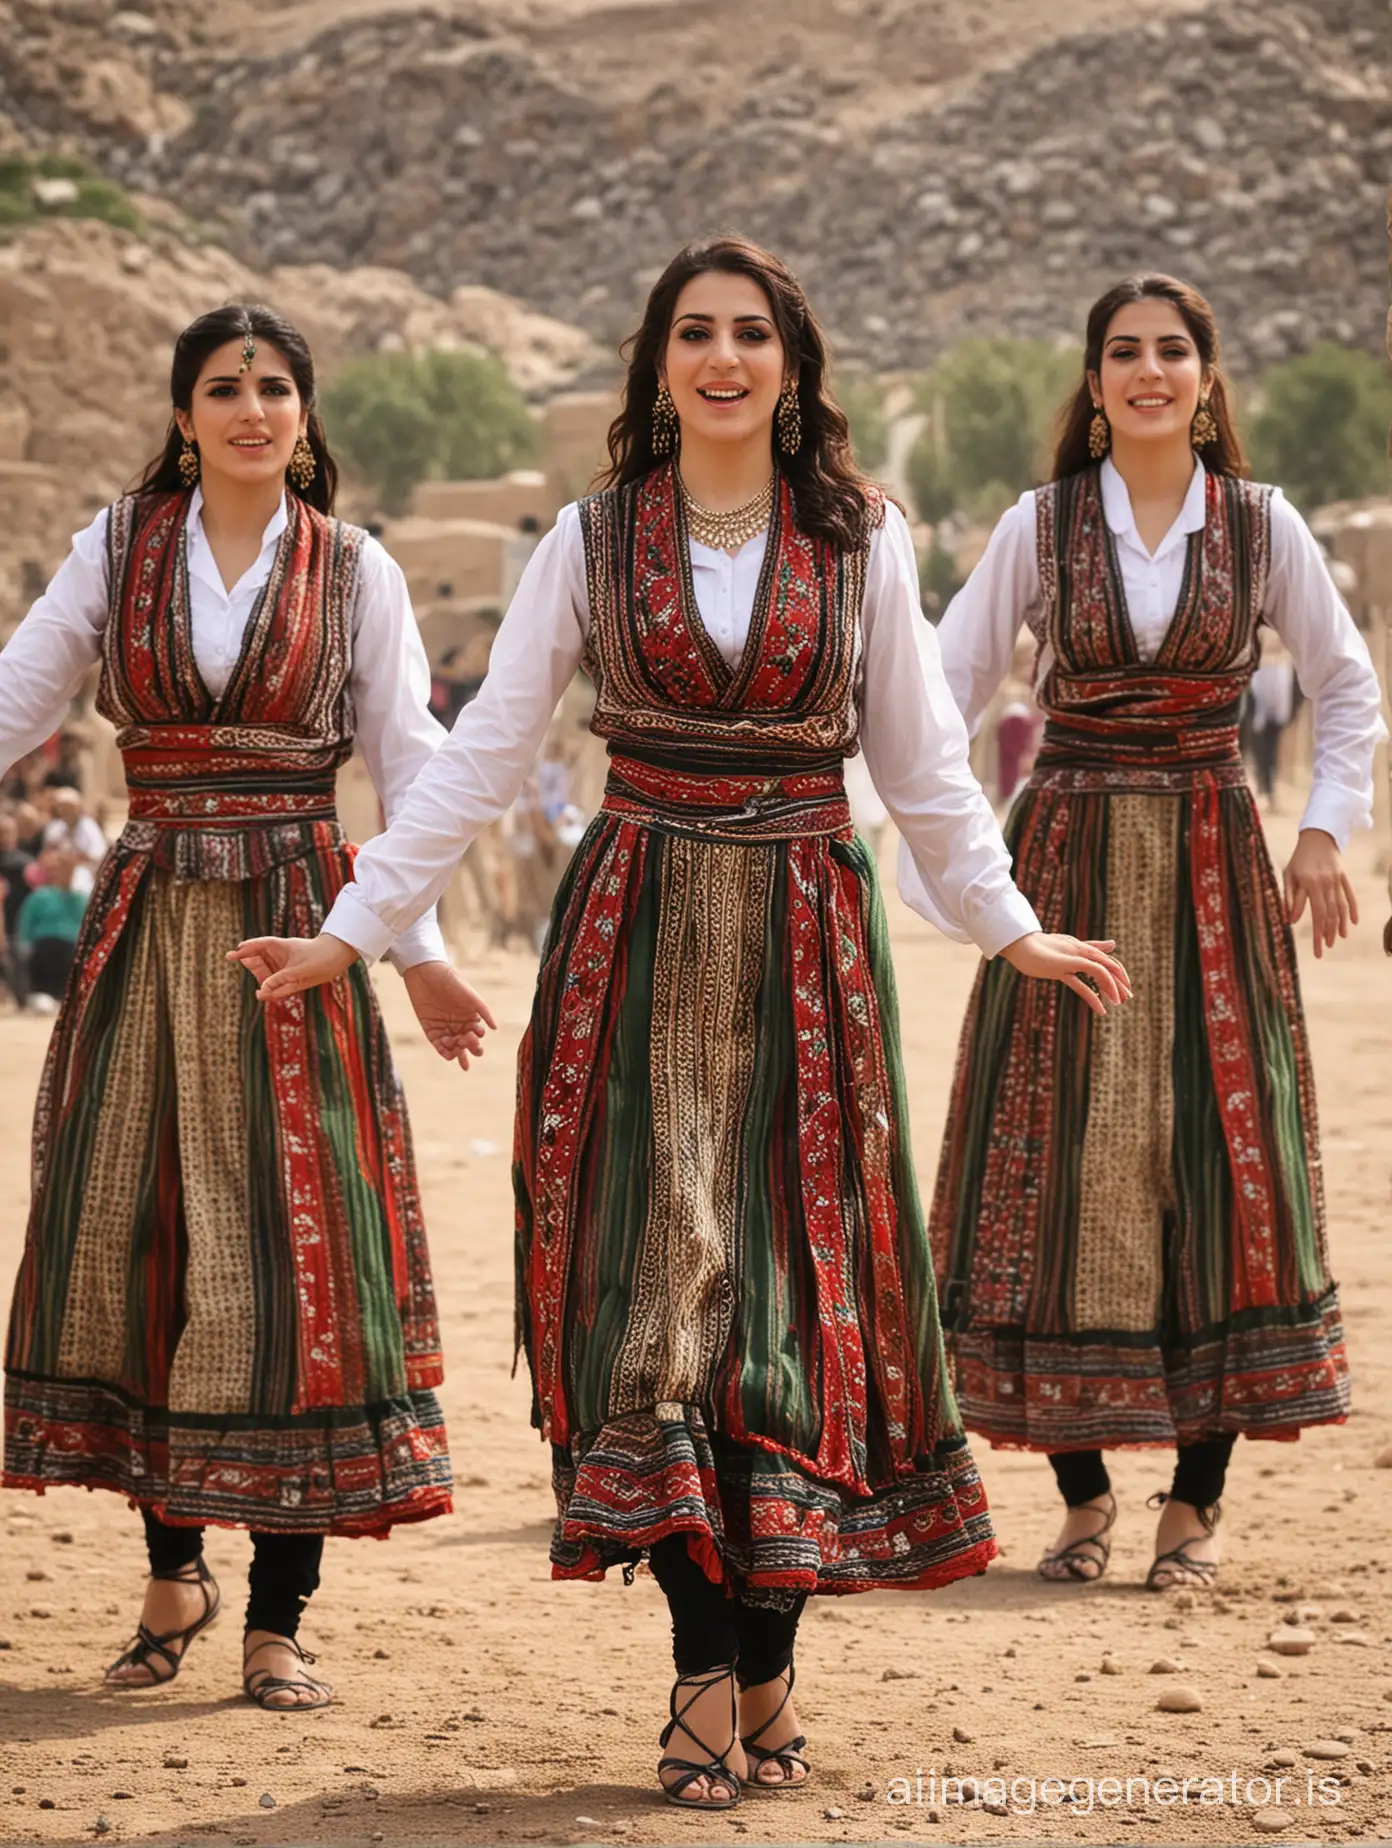 show me a group of Kurdi 
dance from iran